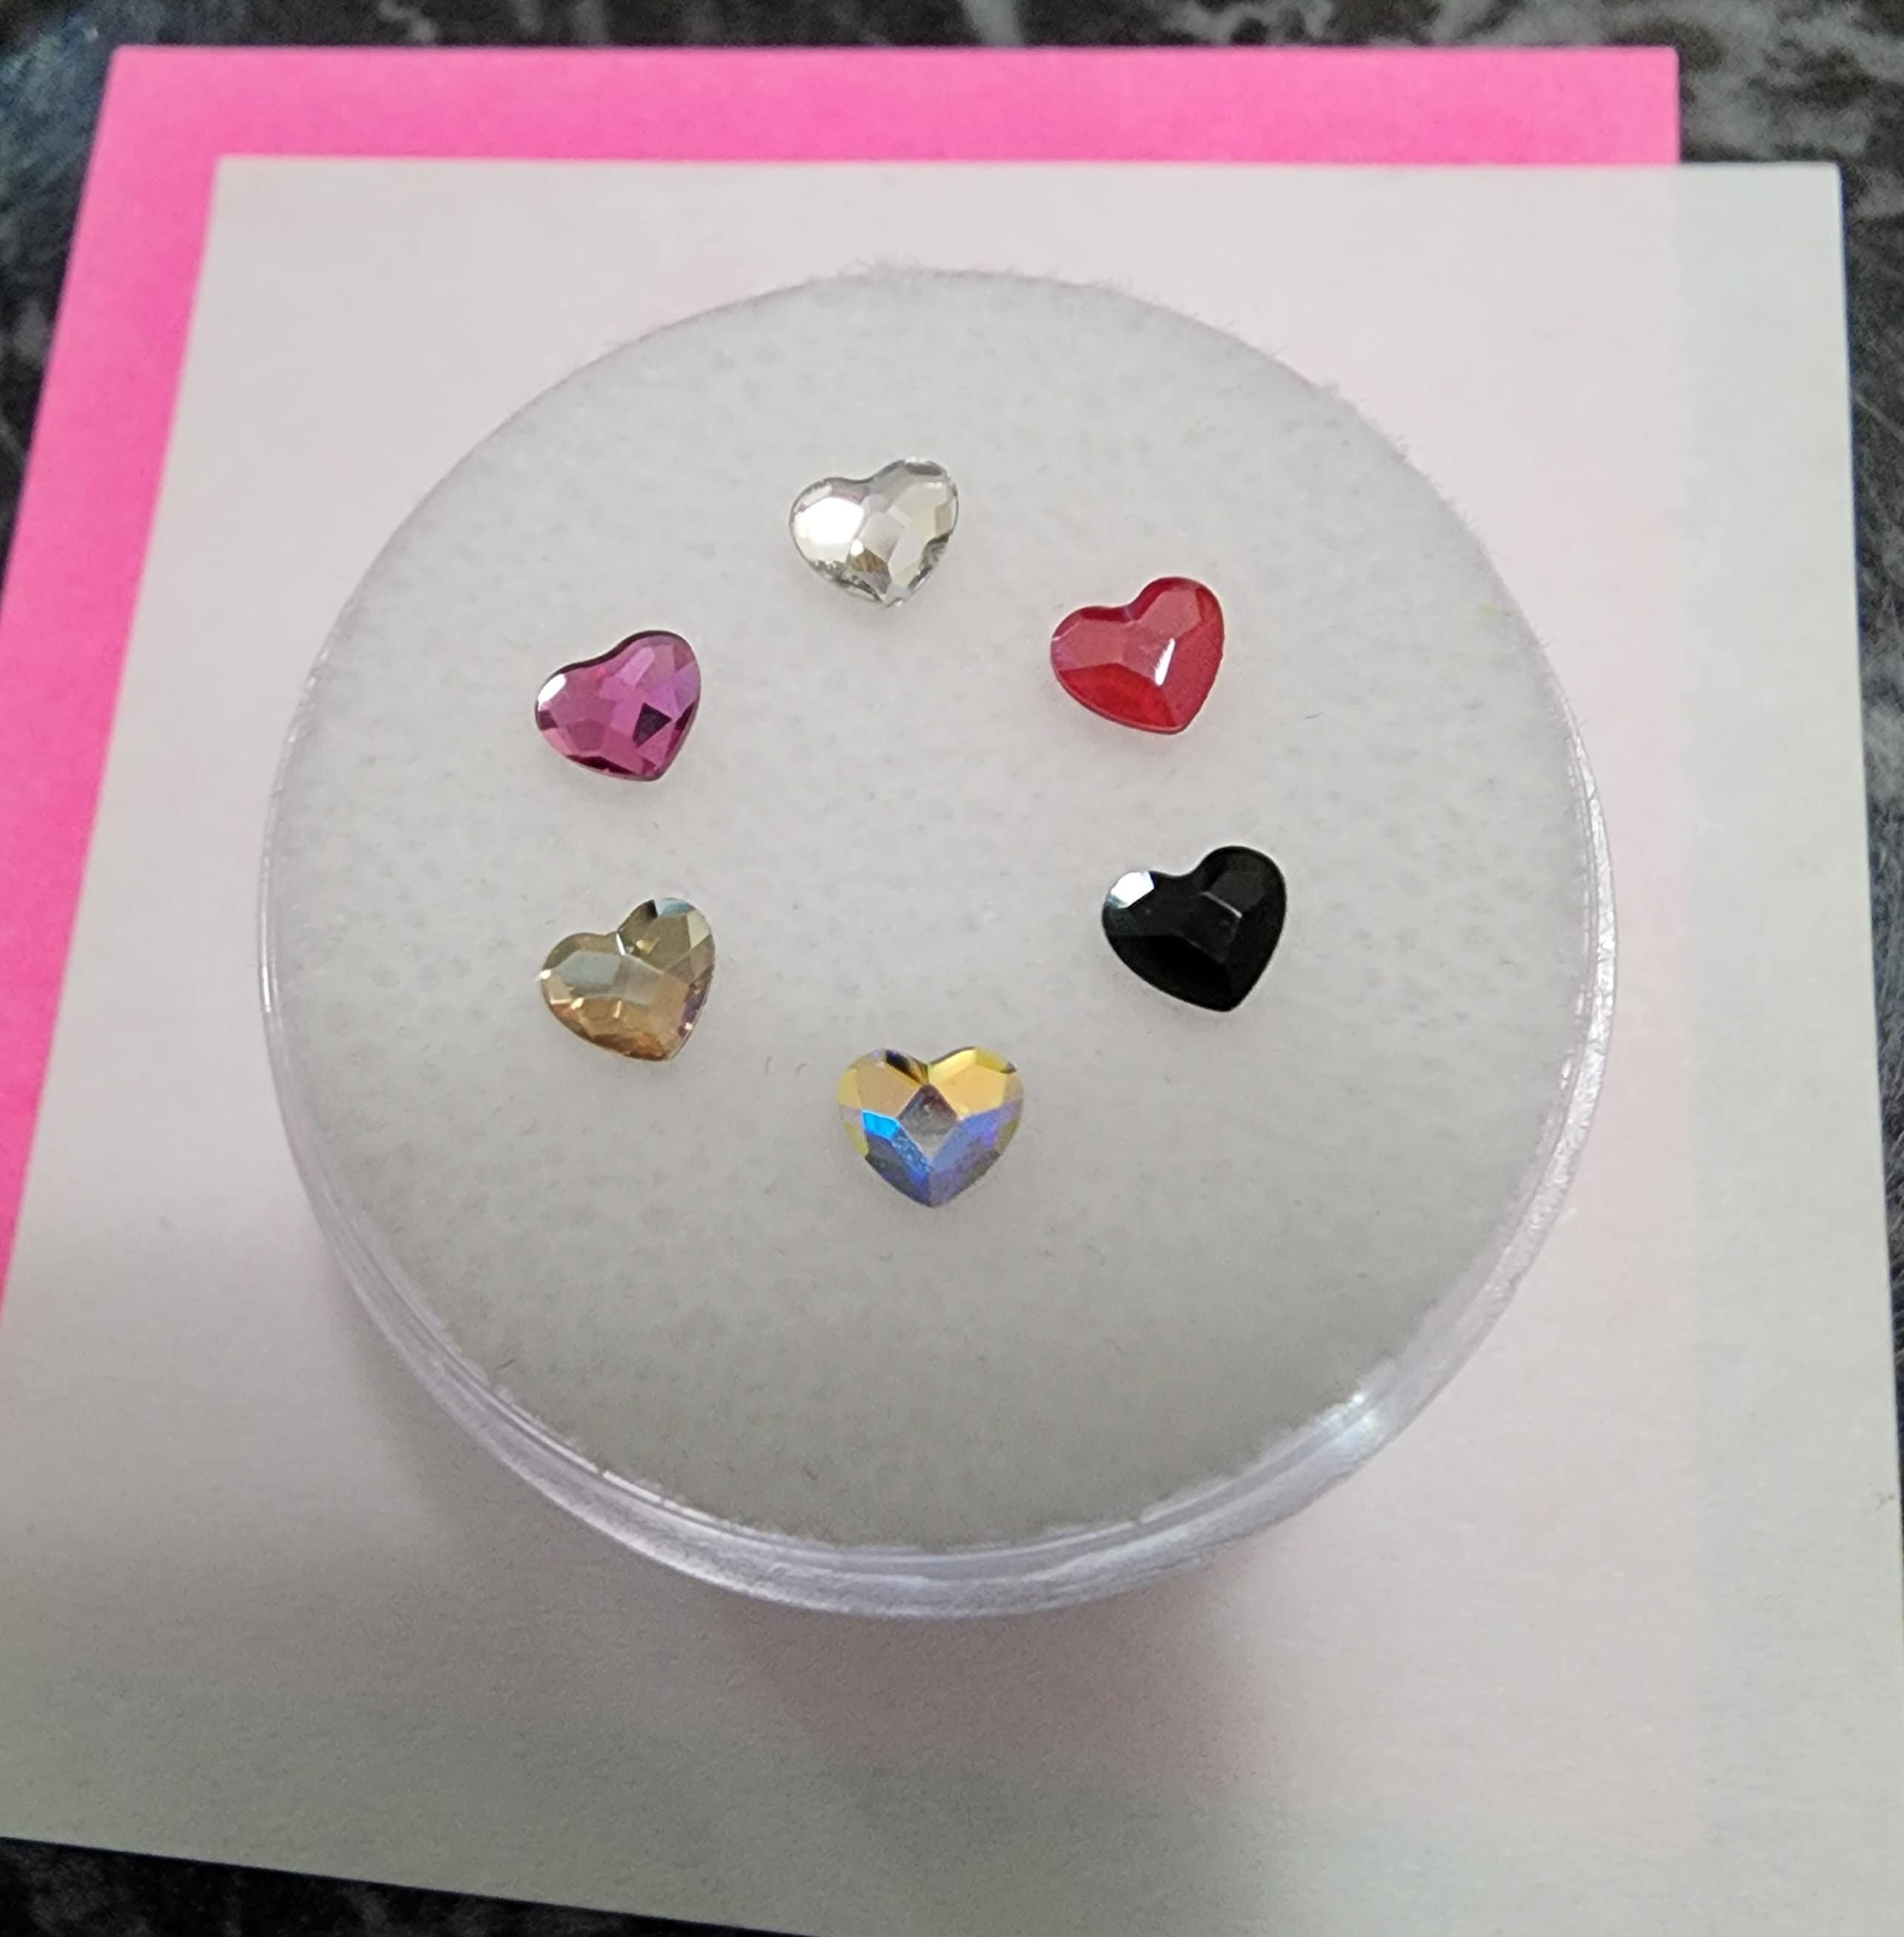 So Icy DIY Tooth Gem Kit heart Edition 